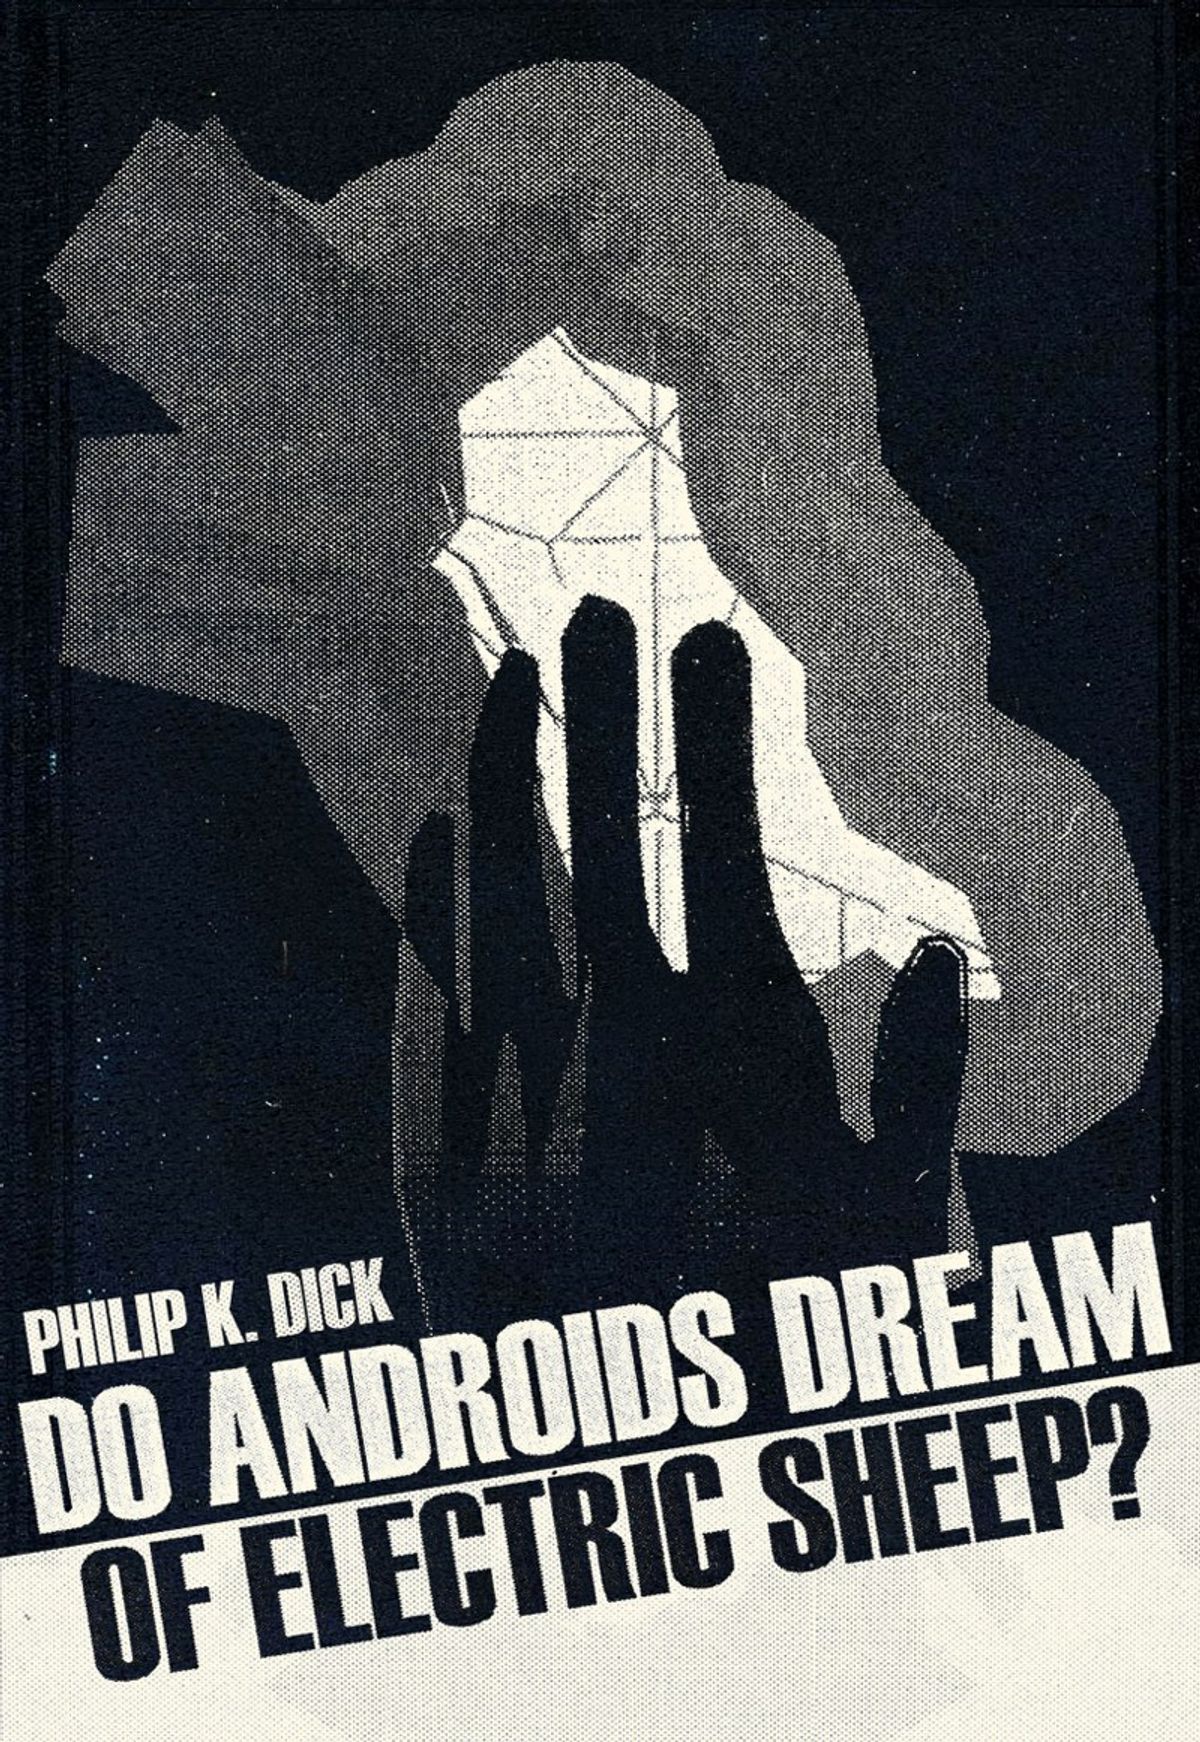 Book of the Week: 'Do Androids Dream of Electric Sheep' by Phillip K. Dick